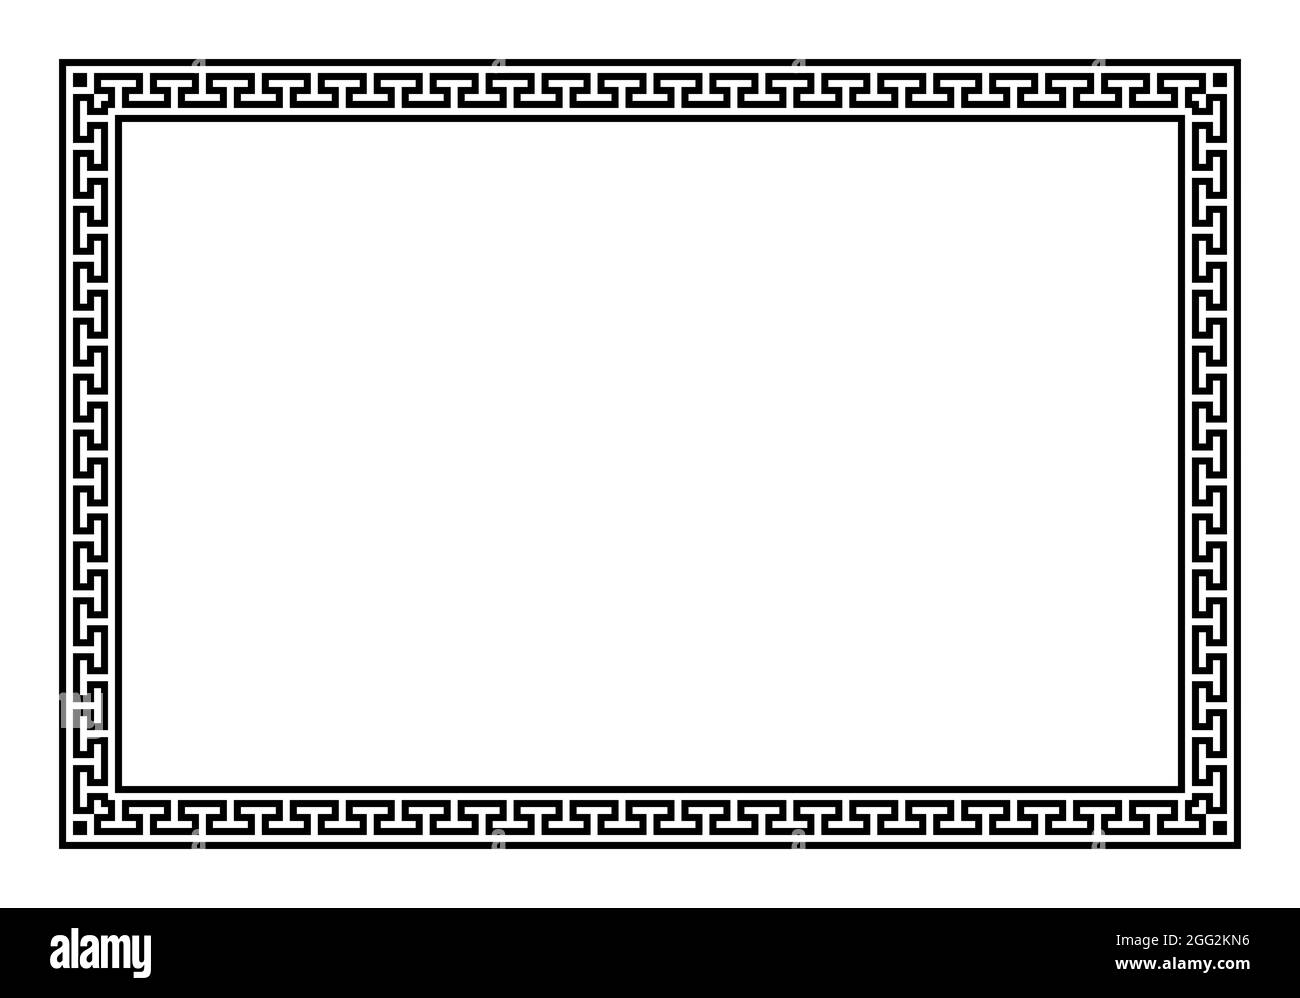 Rectangular frame with seamless meander pattern. Decorative border, made of continuous lines, shaped into a repeated motif. Known as Greek key pattern. Stock Photo